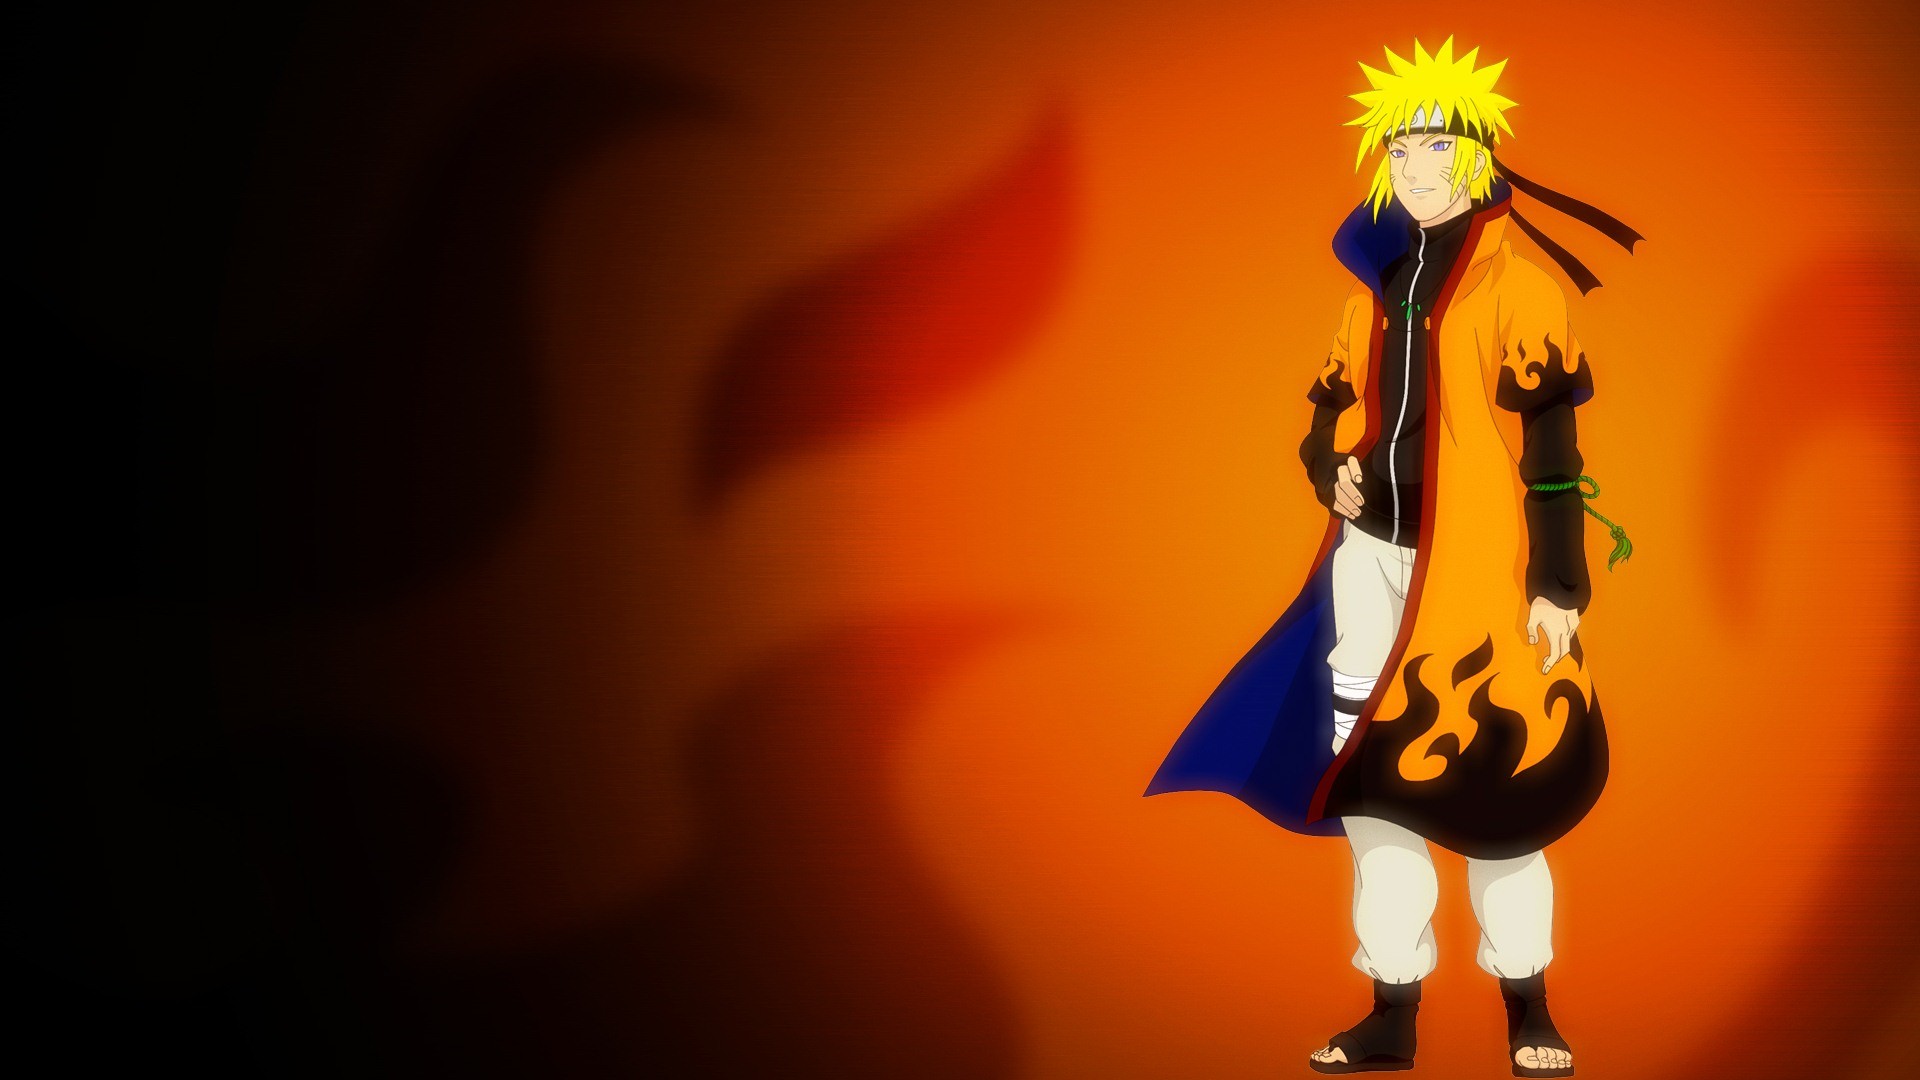 1920x1080 Anime Naruto Cool  Hd Pictures.